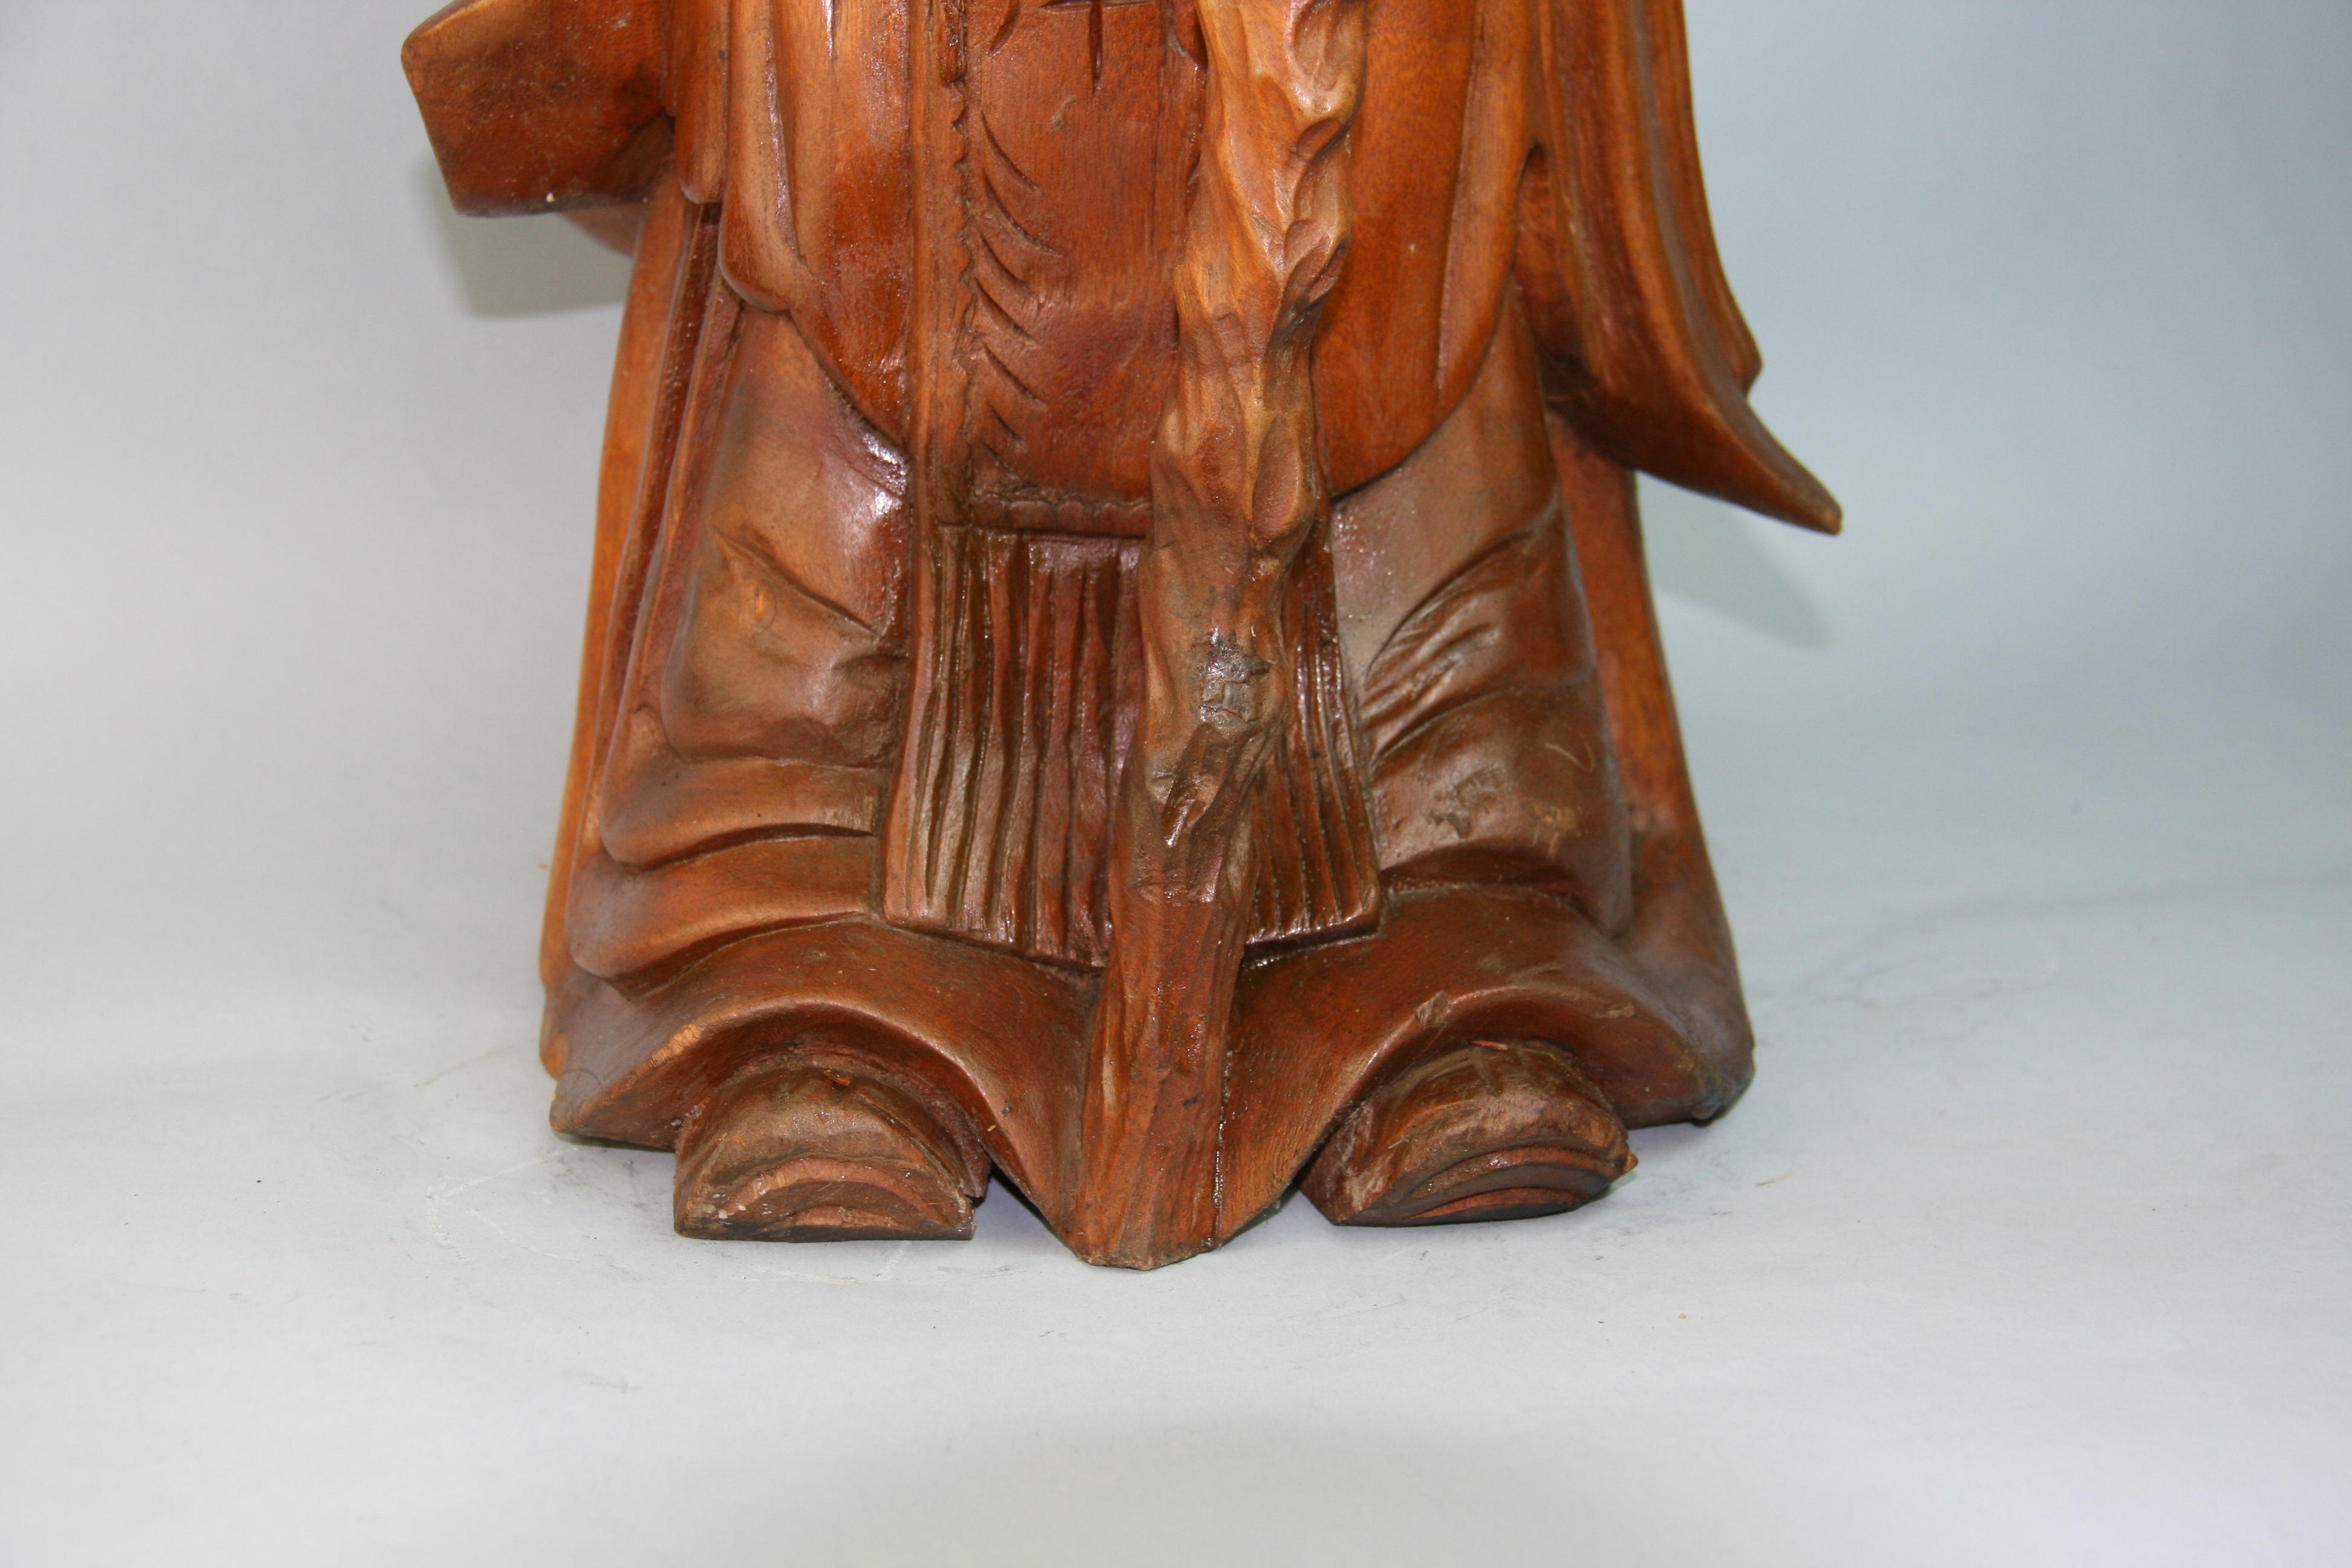 Japanese Oversized Wise Buddha Hand Carved Boxwood Sculpture Early 20th Century For Sale 11